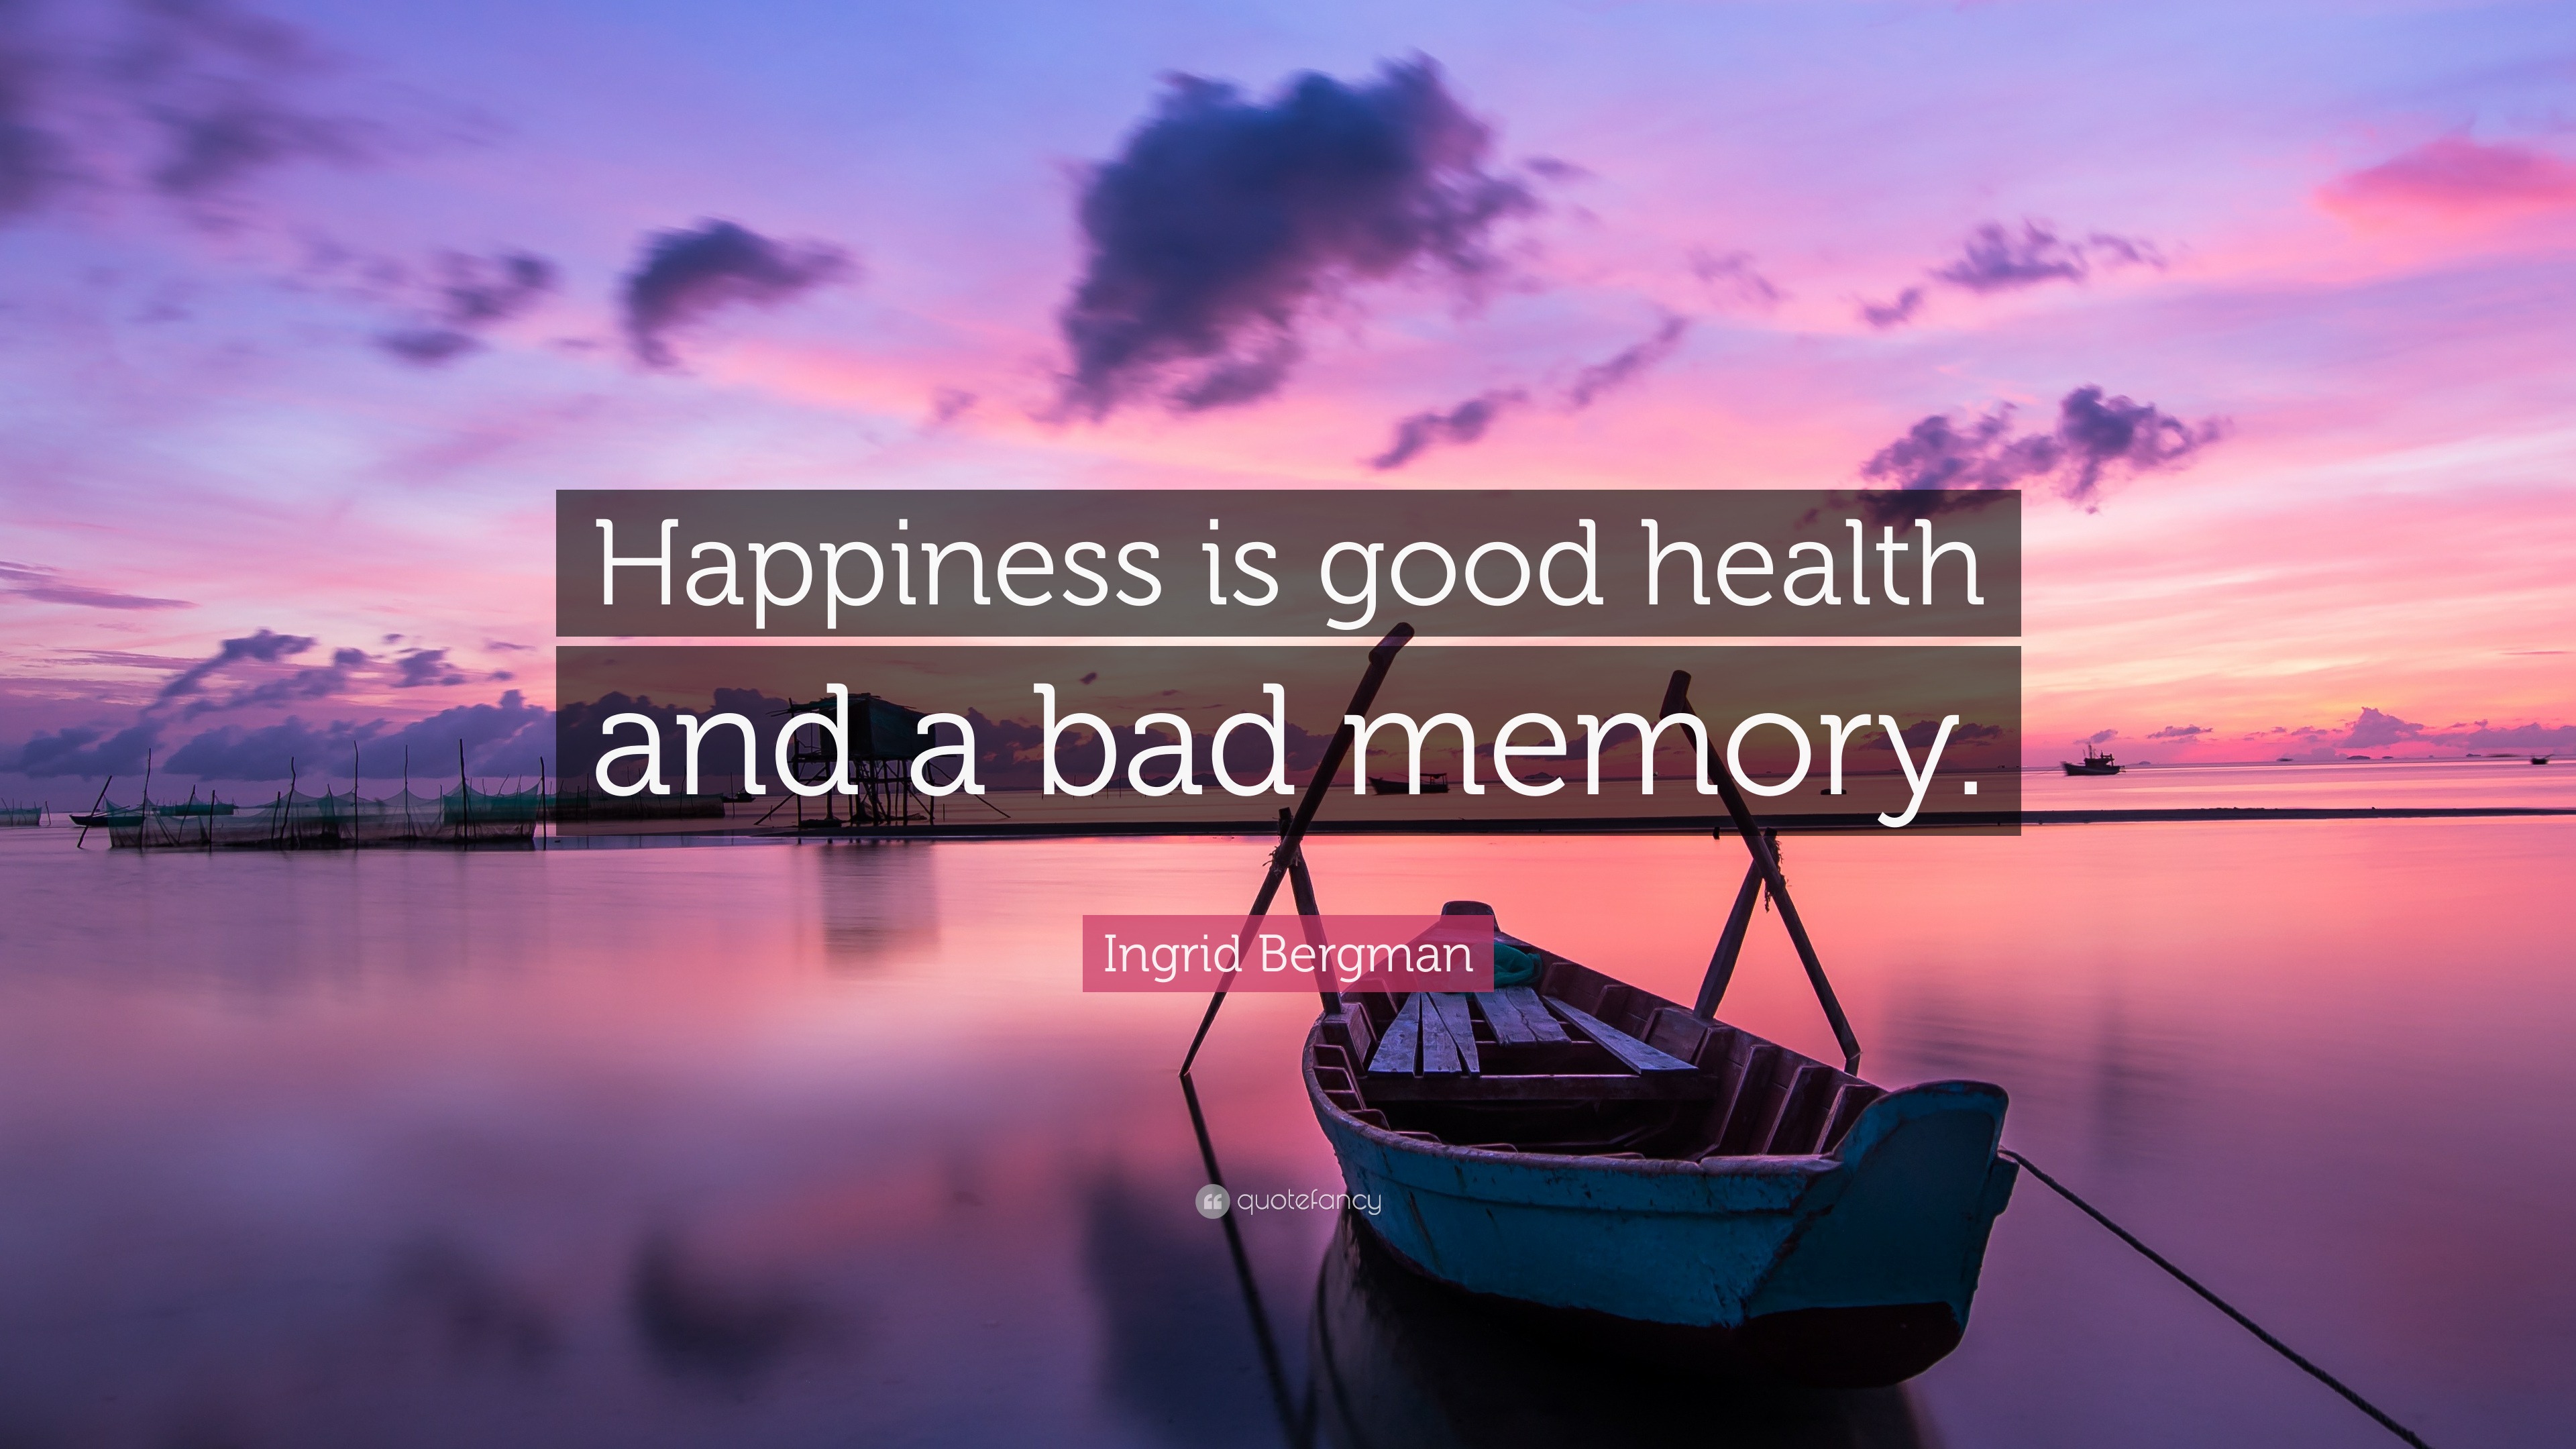 Ingrid Bergman Quote: "Happiness is good health and a bad memory." (7 ...